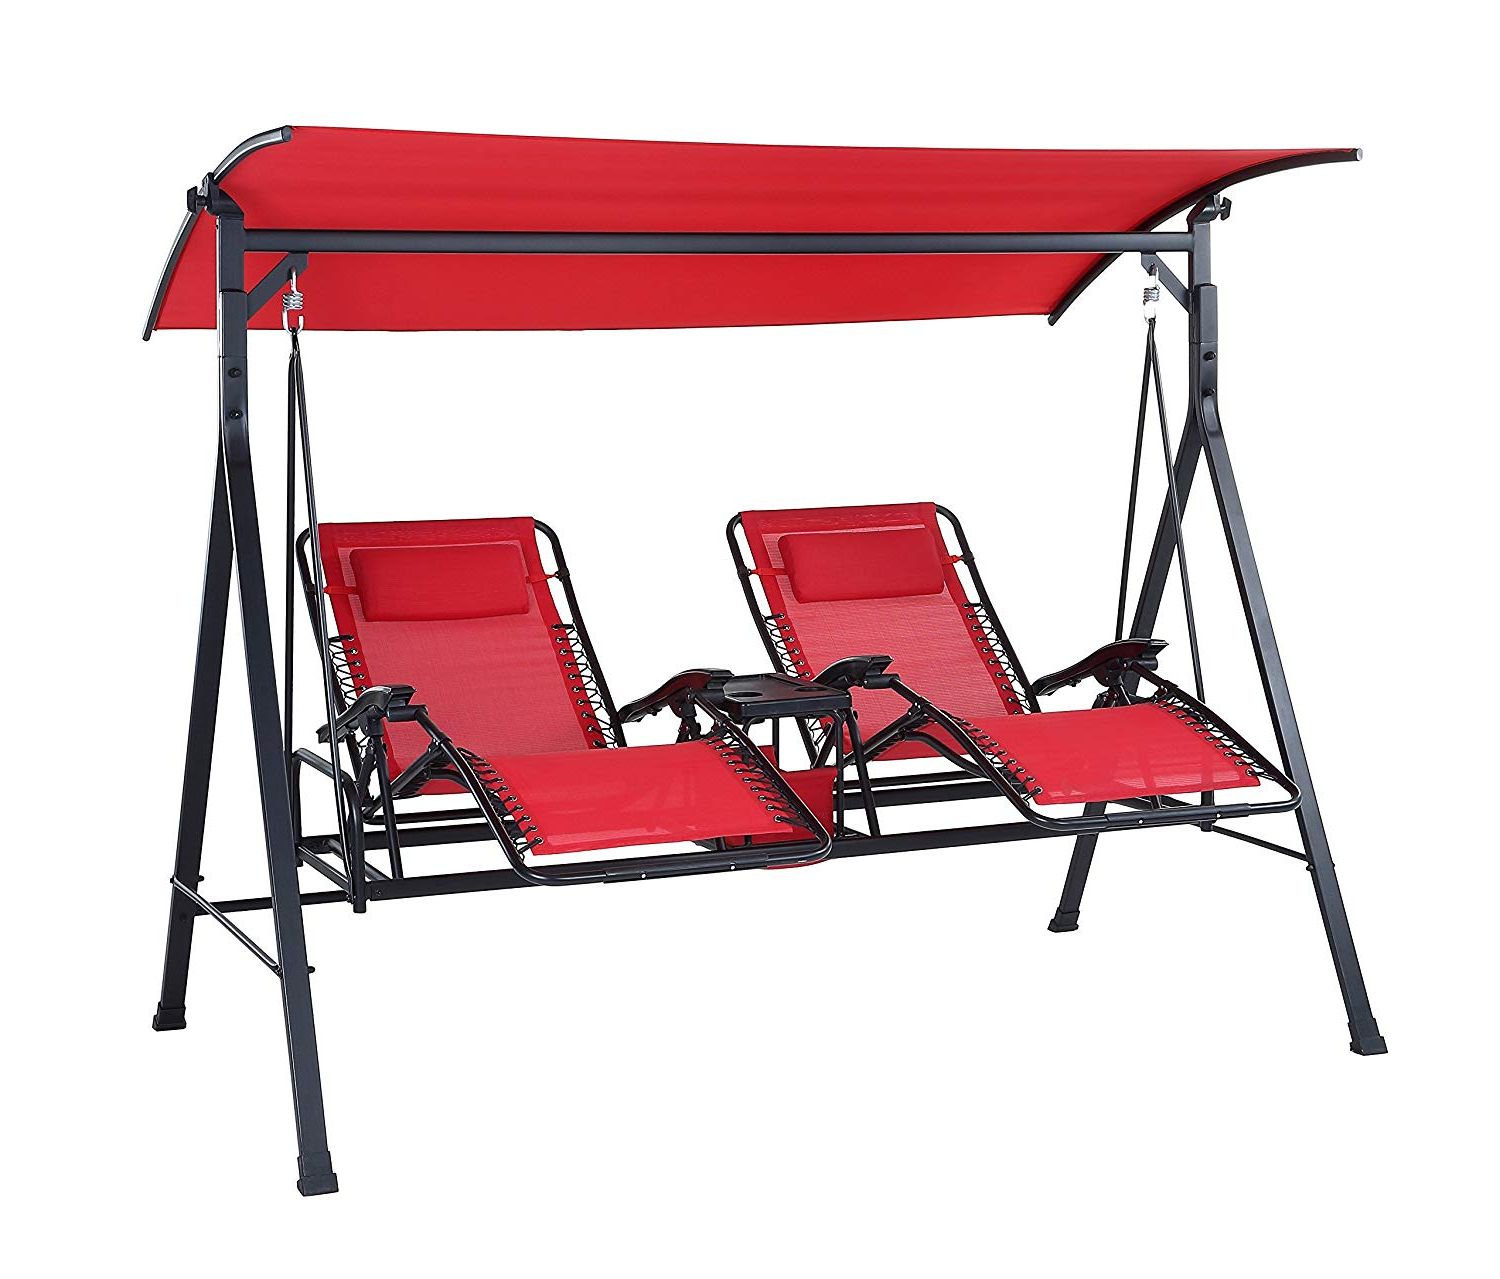 [%best Outdoor Reclining Zero Gravity Swing [2020 Update In Favorite Canopy Patio Porch Swings With Pillows And Cup Holders|canopy Patio Porch Swings With Pillows And Cup Holders For Fashionable Best Outdoor Reclining Zero Gravity Swing [2020 Update|current Canopy Patio Porch Swings With Pillows And Cup Holders Inside Best Outdoor Reclining Zero Gravity Swing [2020 Update|newest Best Outdoor Reclining Zero Gravity Swing [2020 Update Intended For Canopy Patio Porch Swings With Pillows And Cup Holders%] (View 10 of 30)